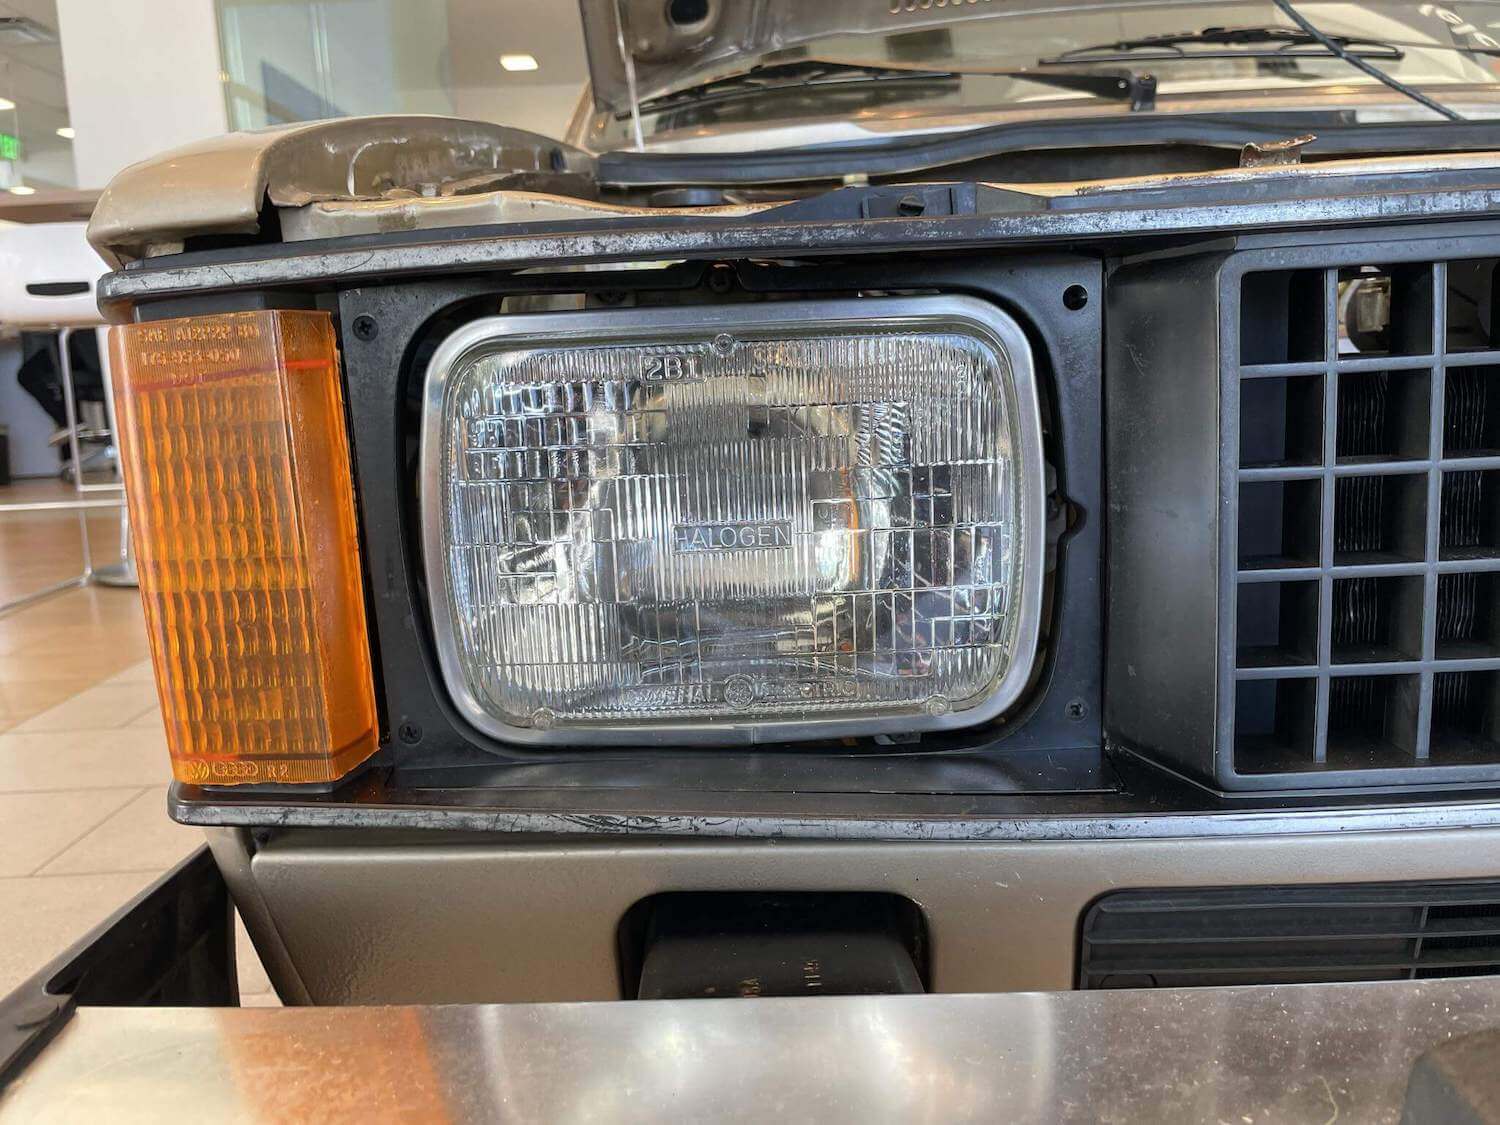 Closeup of the square headlight, grille, and turn signal of a Volkswagen Rabbit compact pickup truck.